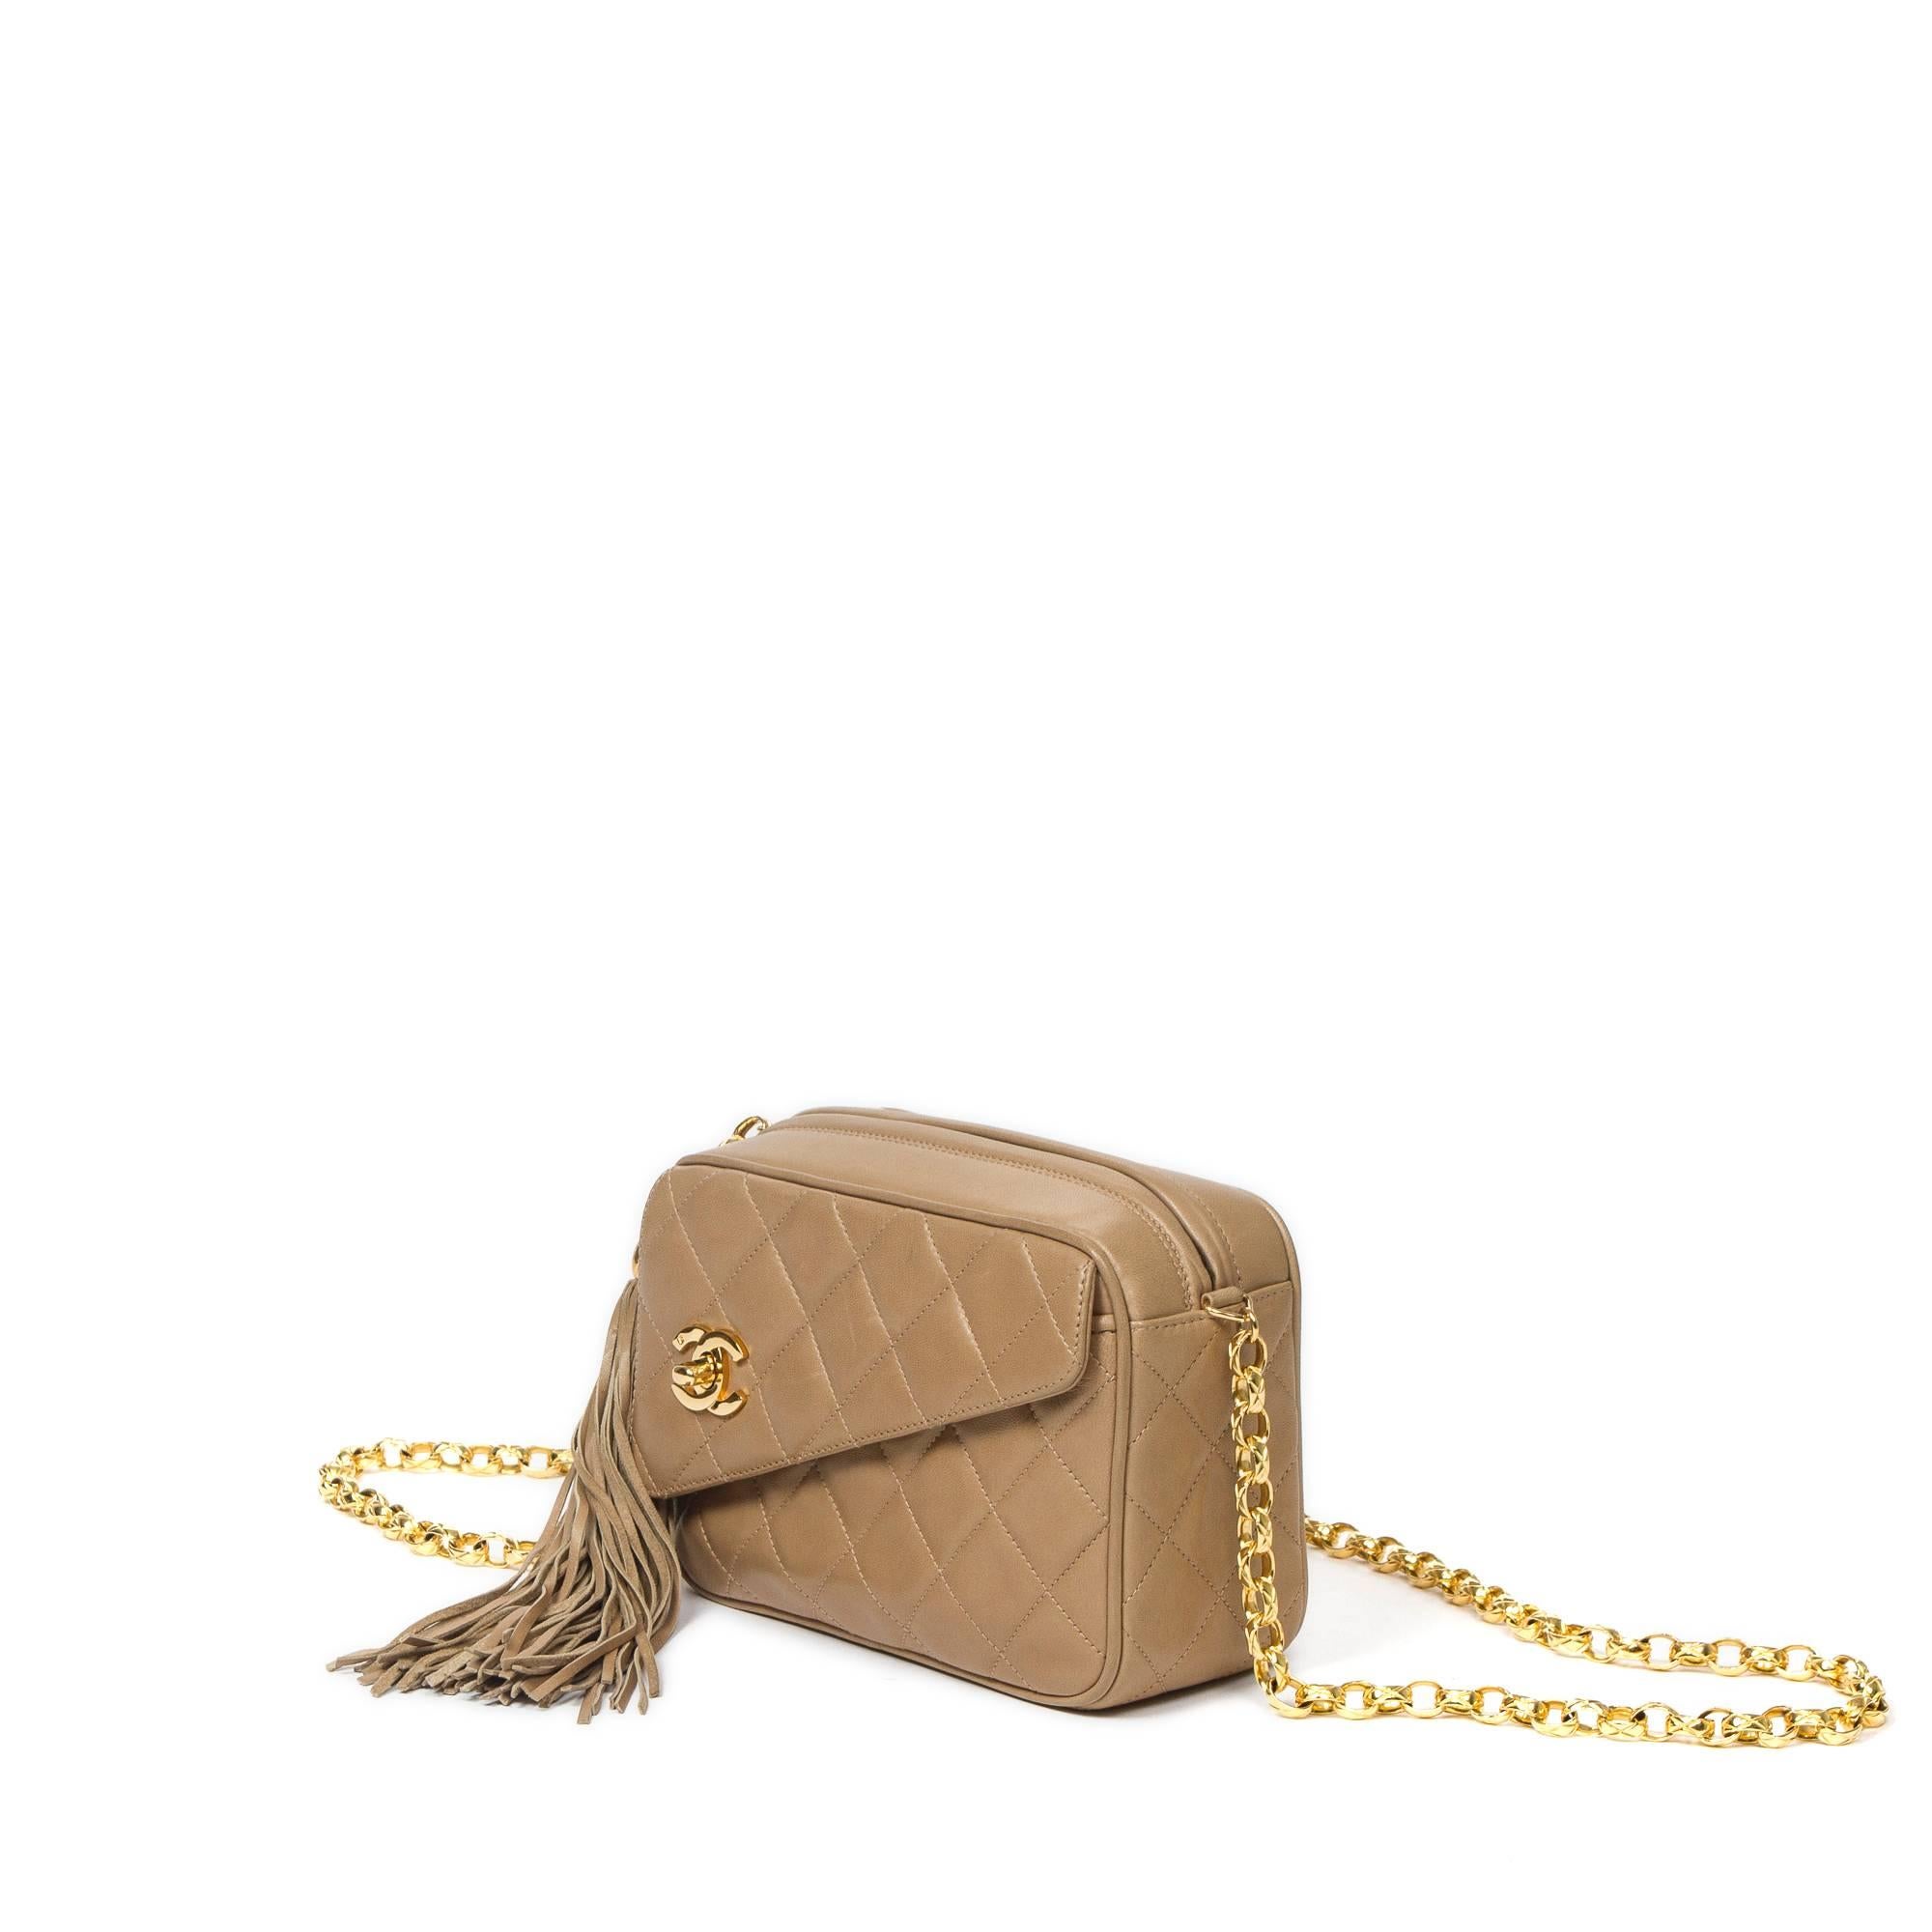 Chanel Vintage Camera Bag 18cm in camel lambskin with thick link gold tone chain strap (50cm). Front pocket with CC turnlock closure. Top zipper closure with leather tassel zipper toggle. Beige leather lined interior with one slip pocket and a zip